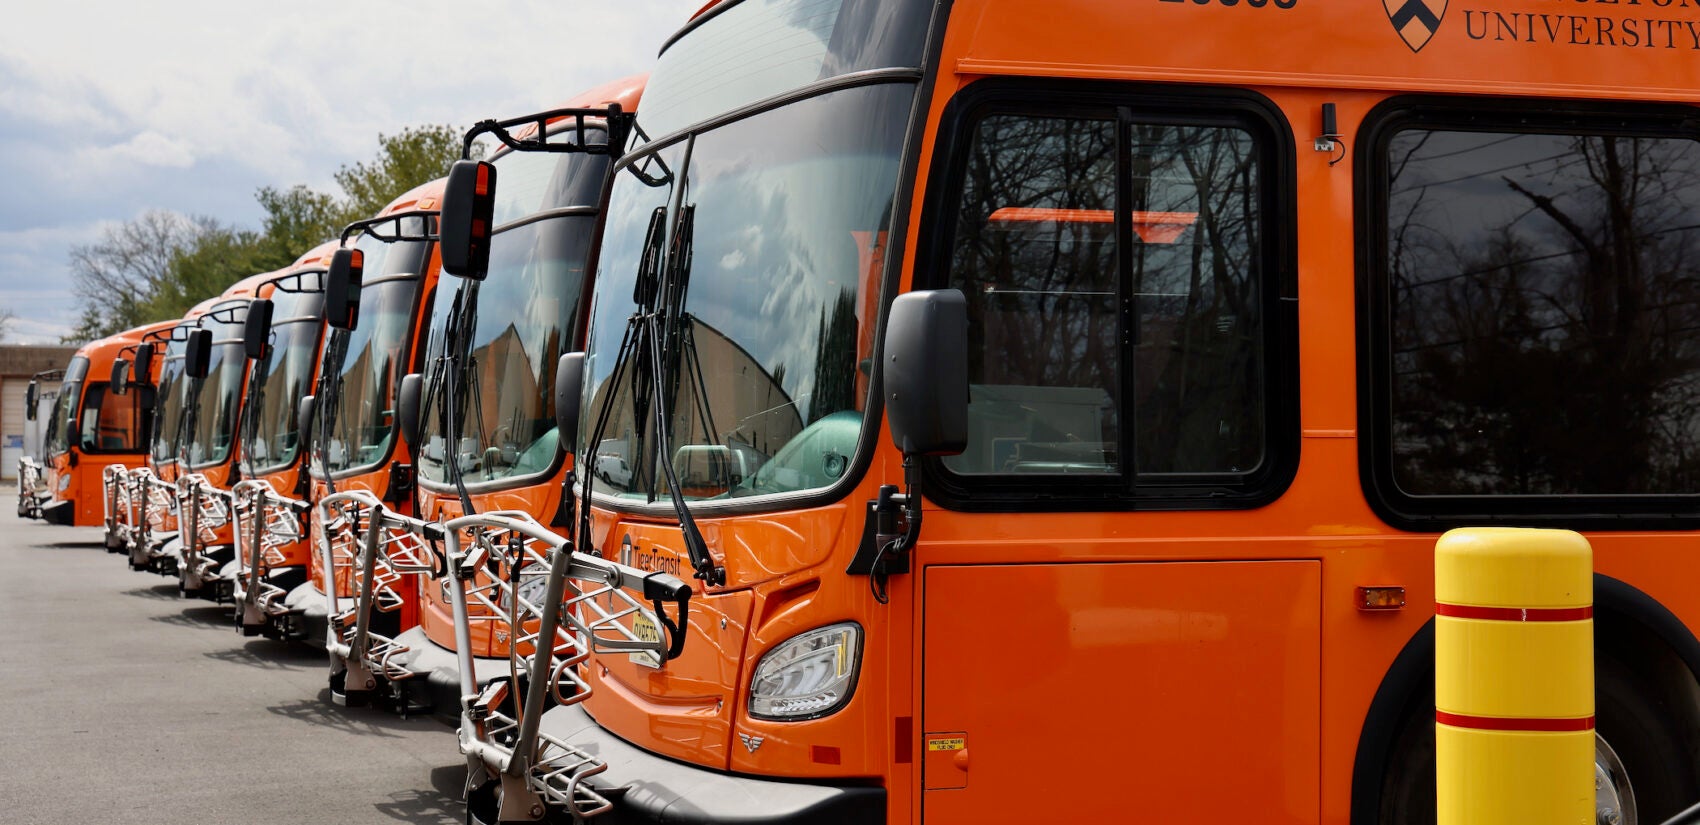 7 of Princeton University's electric buses